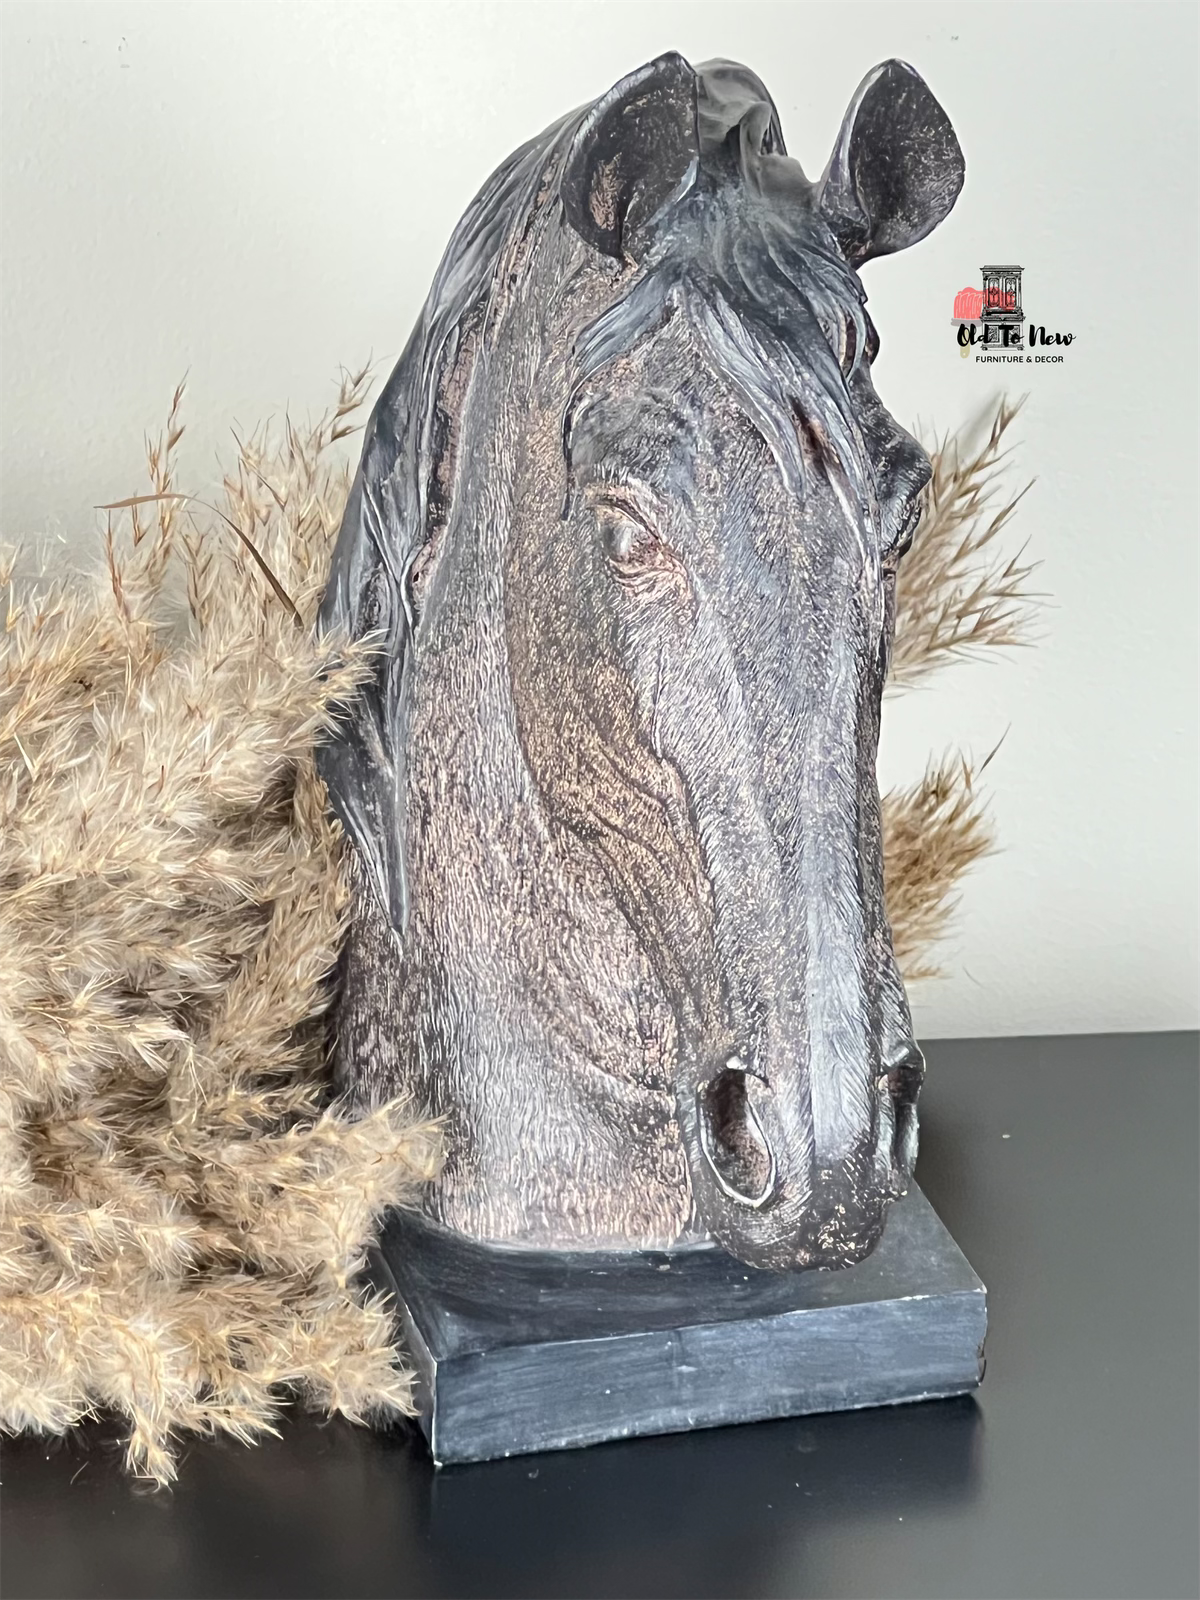 Modern Horse Sculpture, Horse Head Book End, Book Case Decor, see at Old to New Furniture & Decor